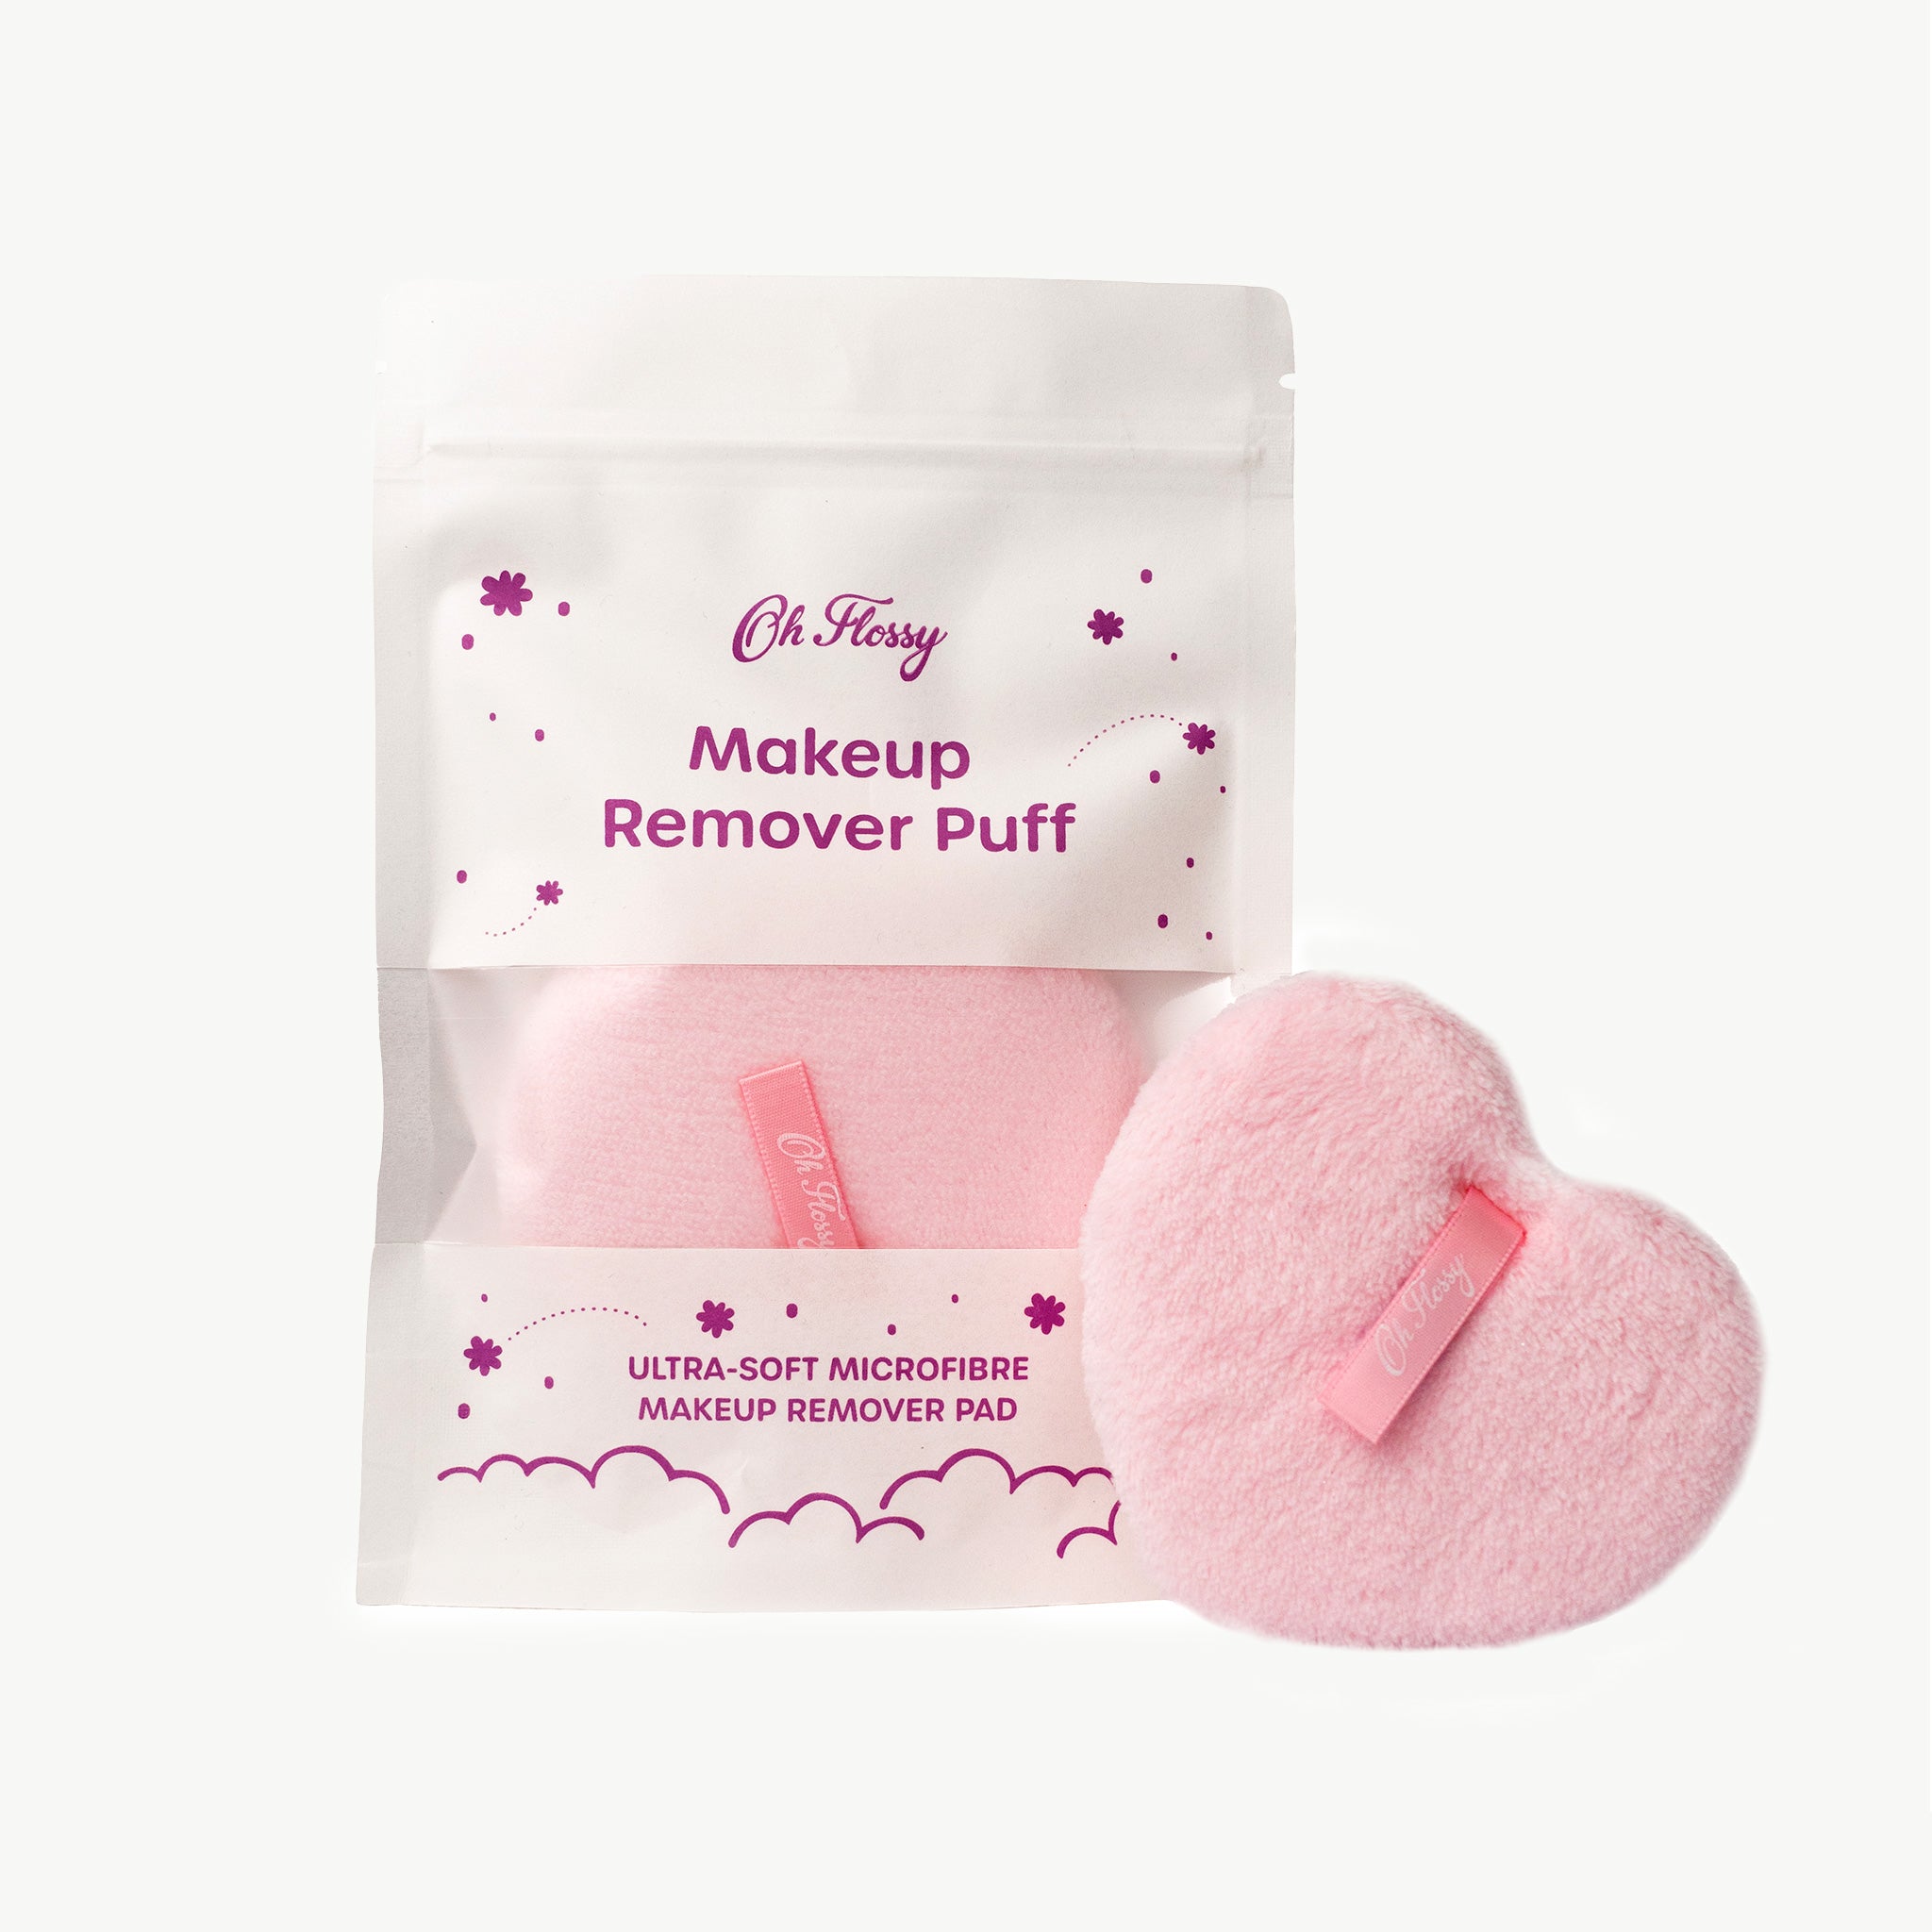 Oh-Flossy-makeup-remover-puff-grouped-packaging